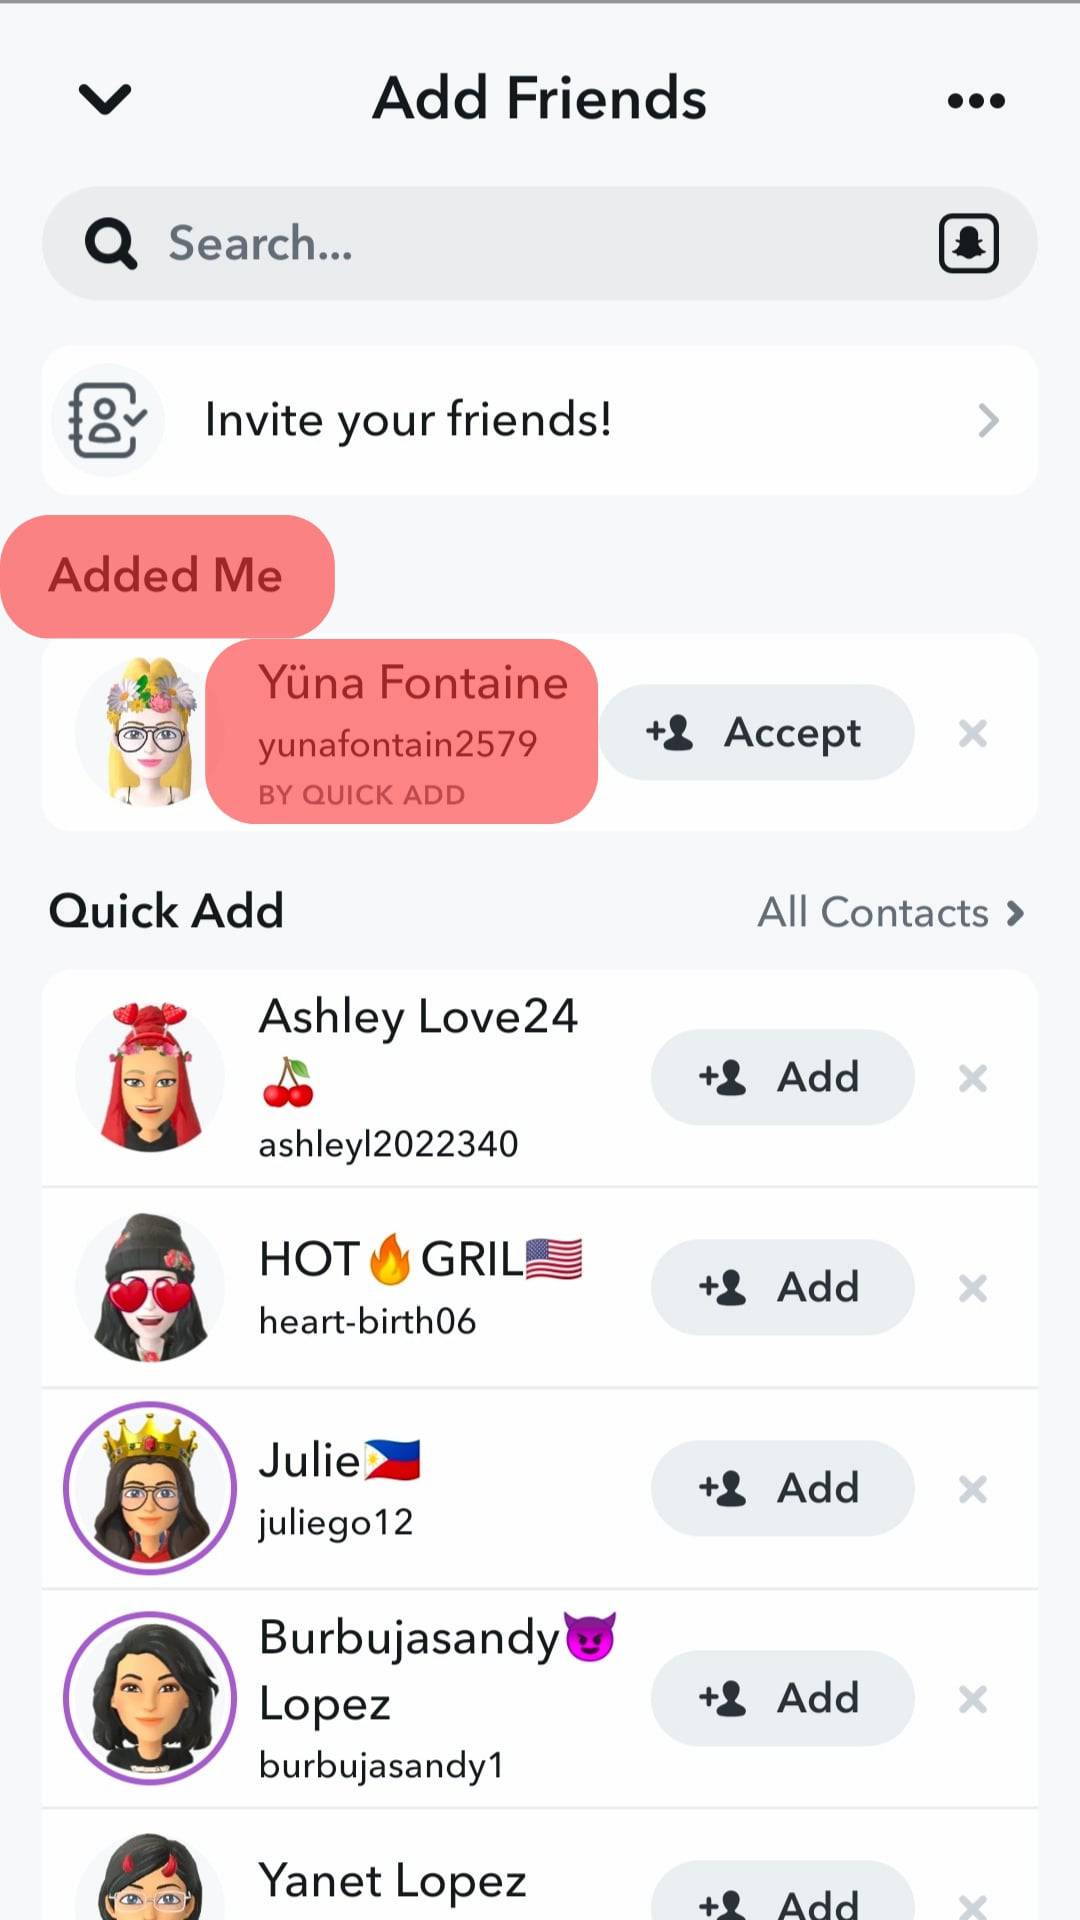 Added Me Section